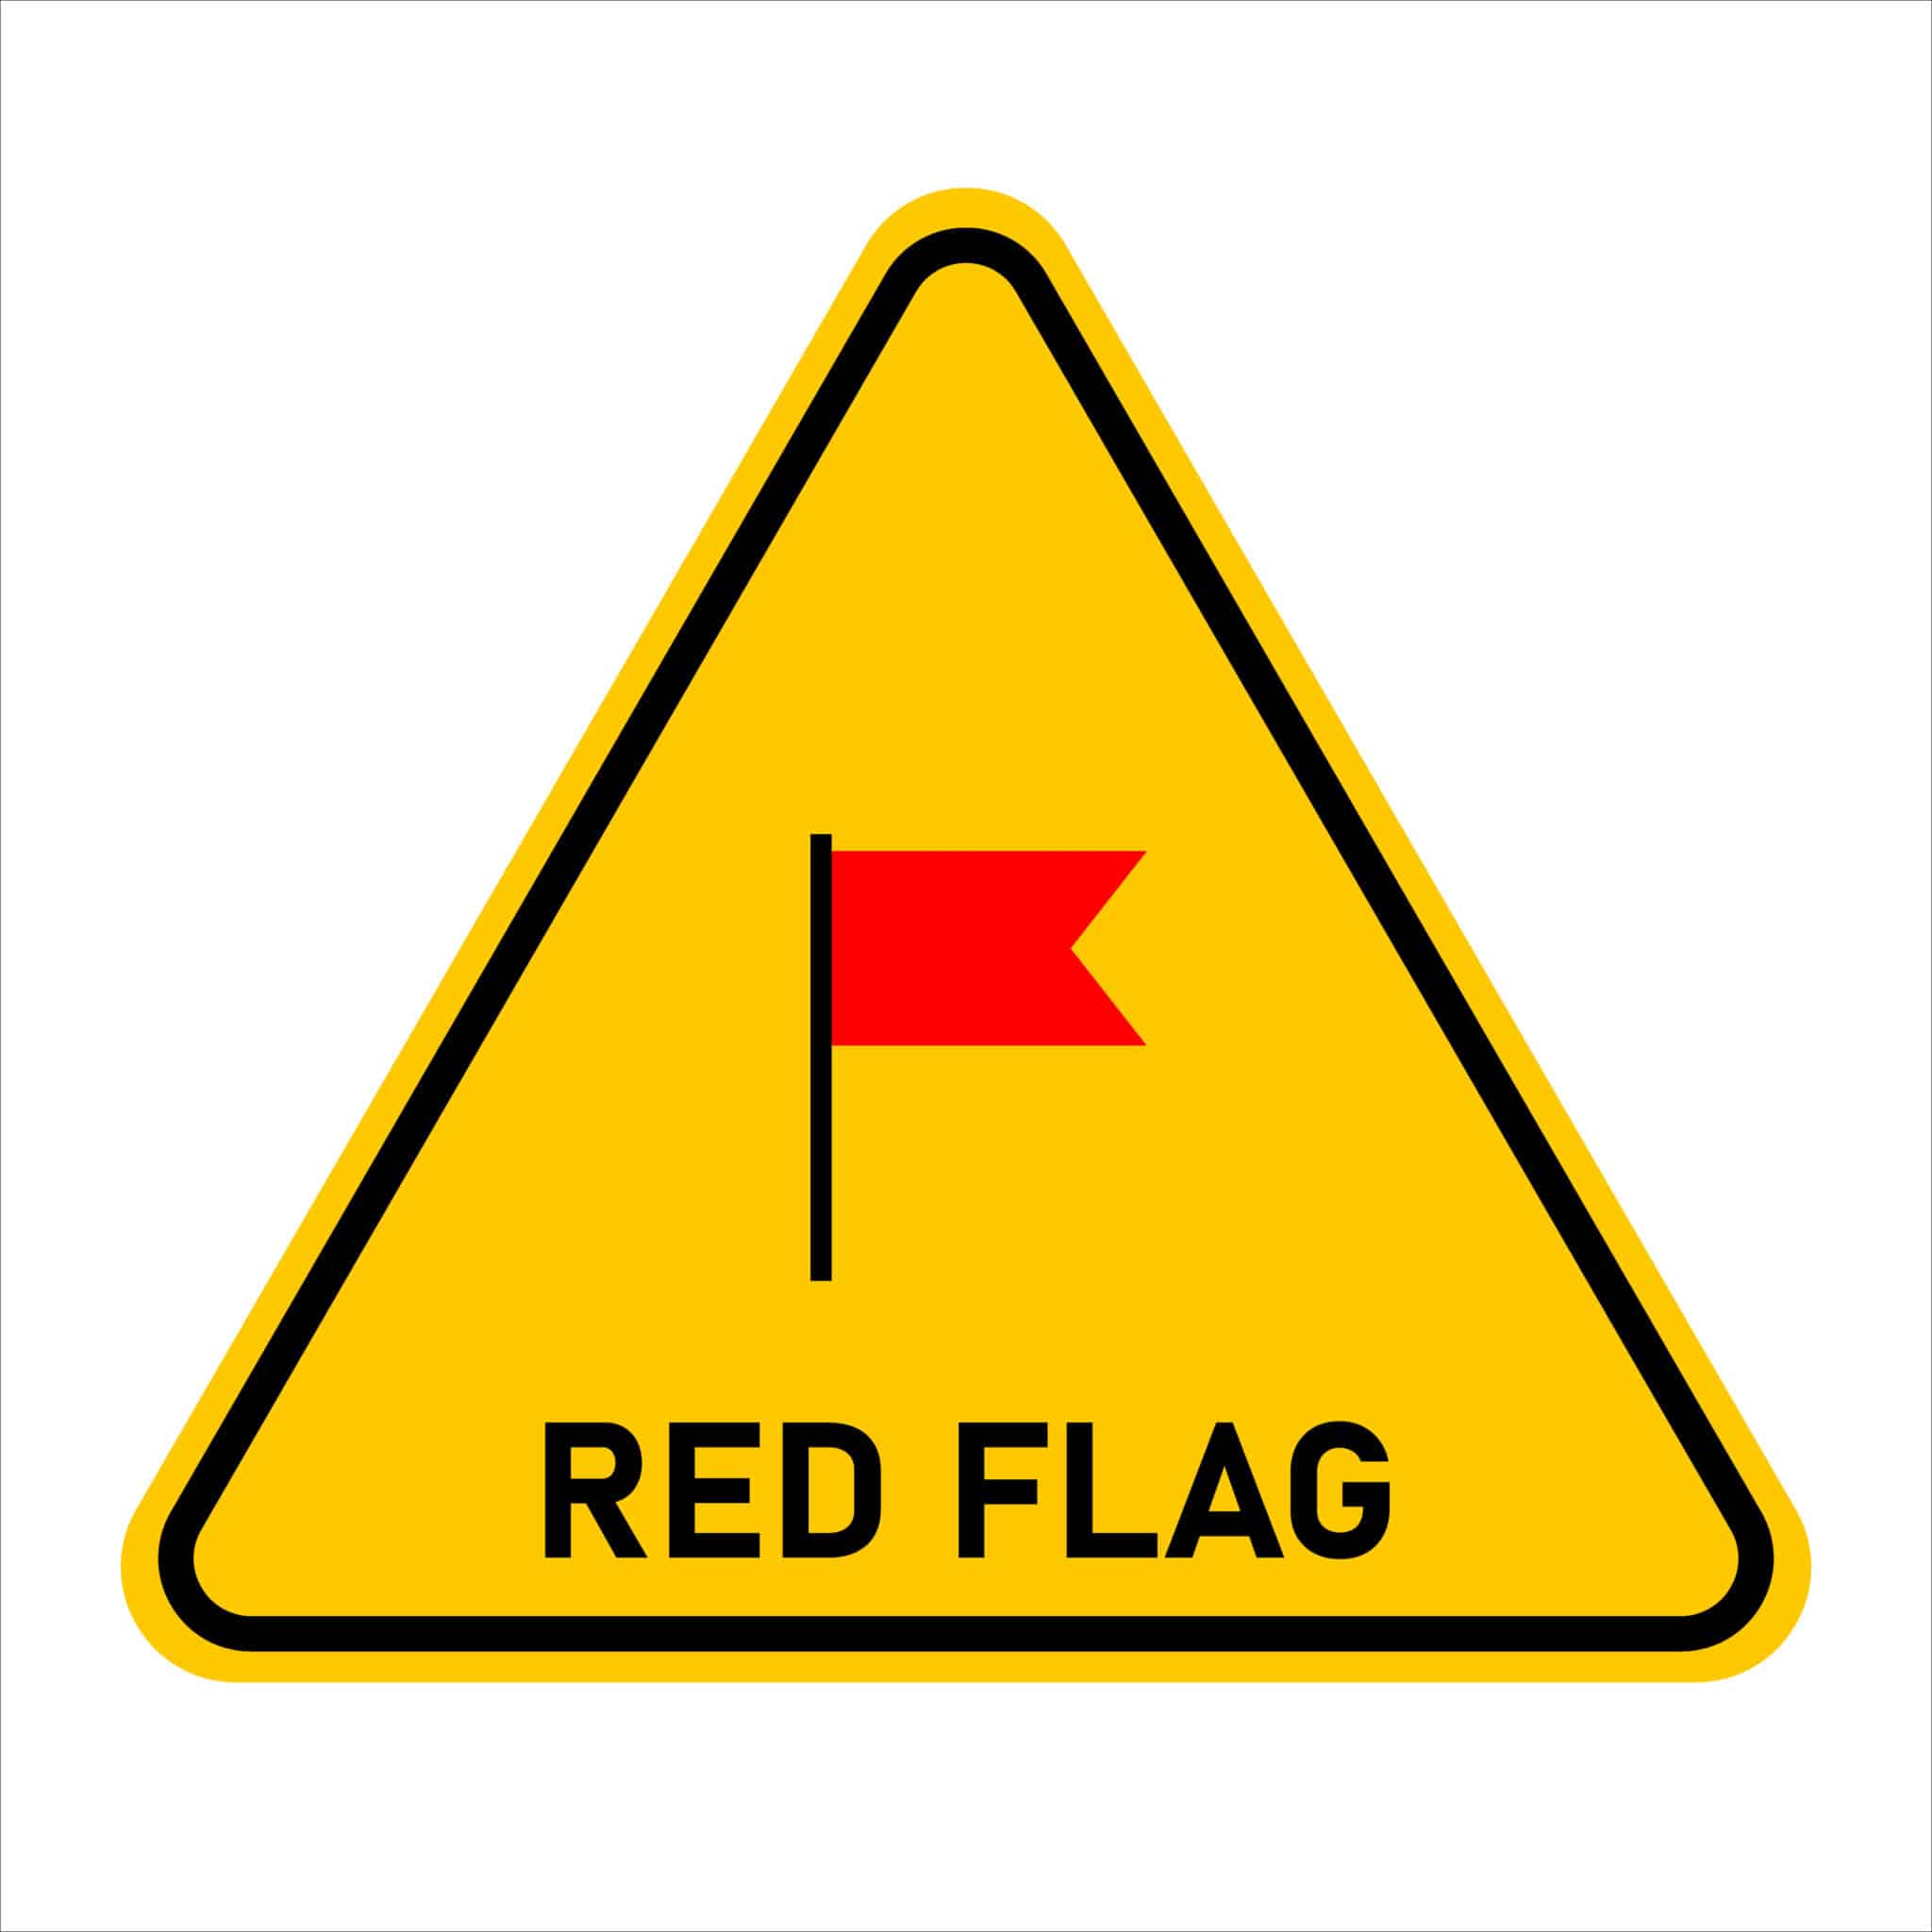 Red flag symbolizing caution and awareness when outsourcing transcription services to minimize risk.